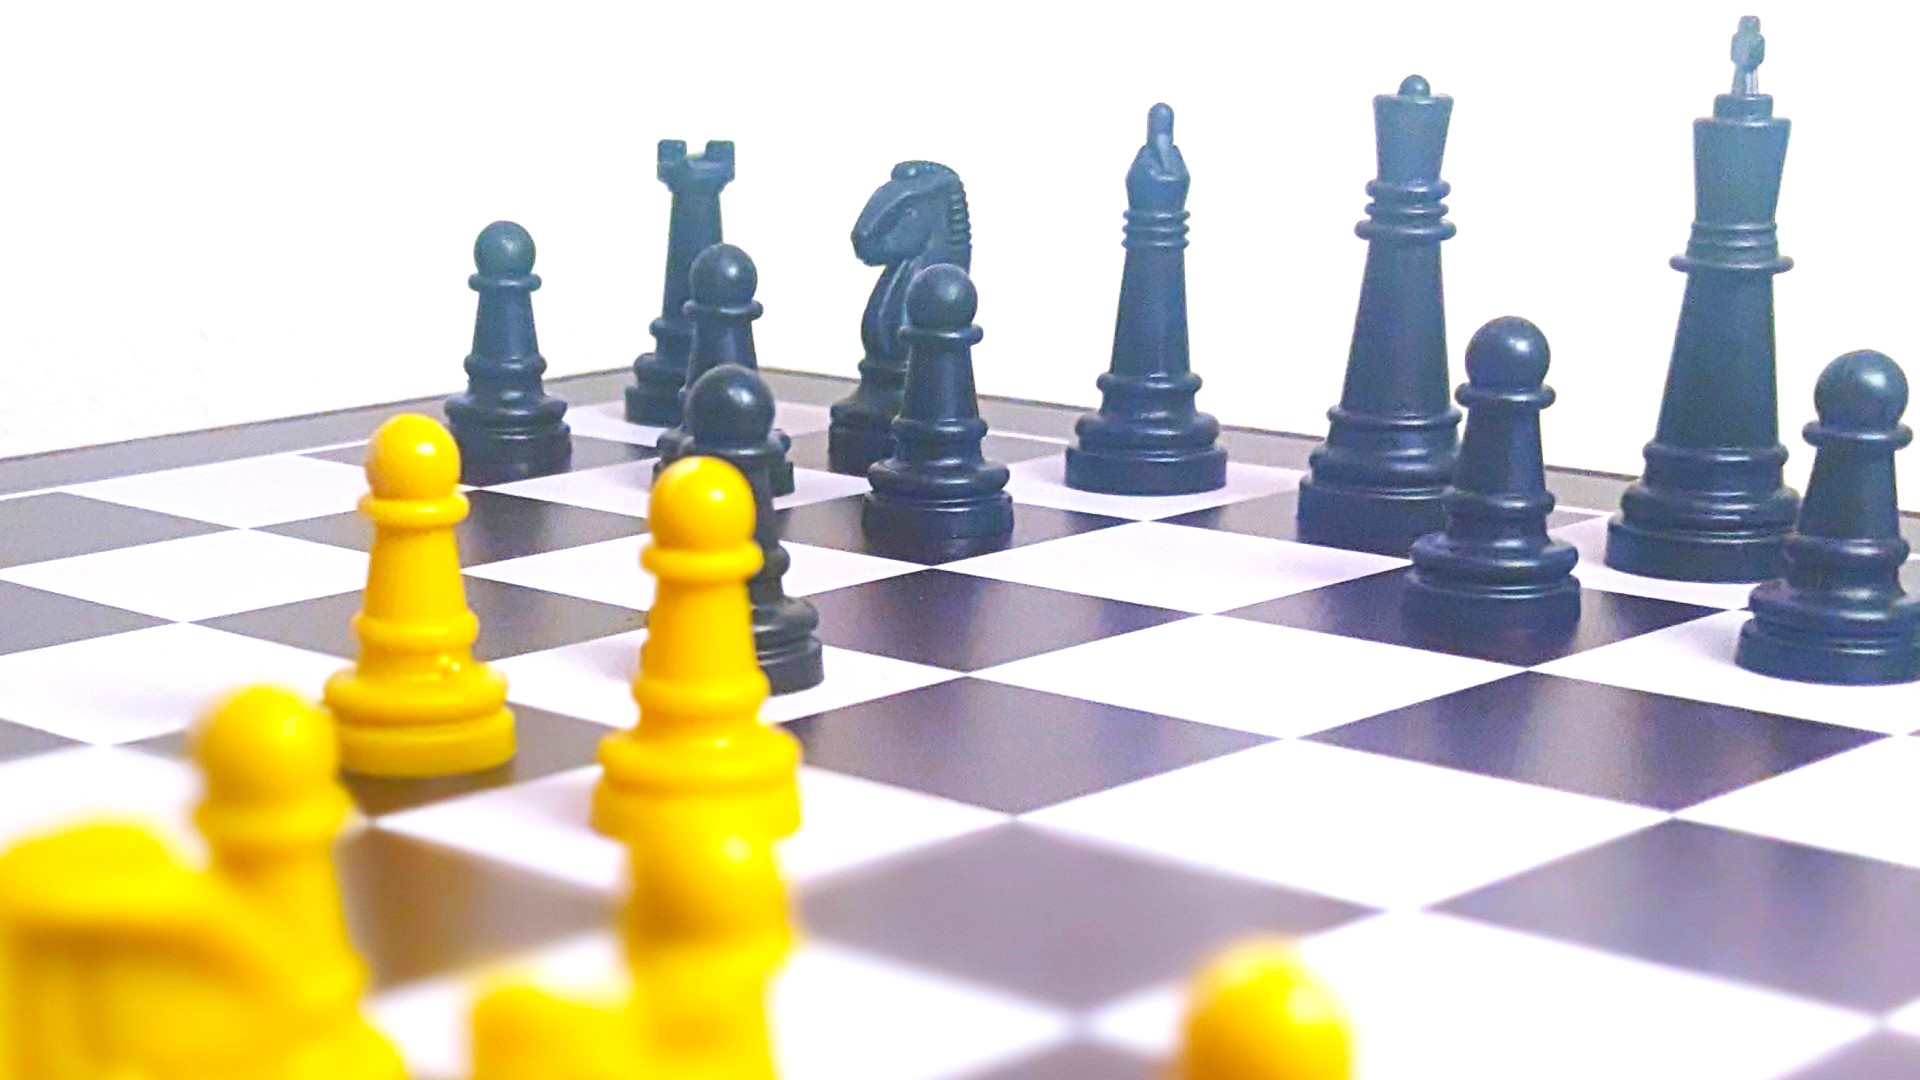 A guide to the best chess openings for beginners